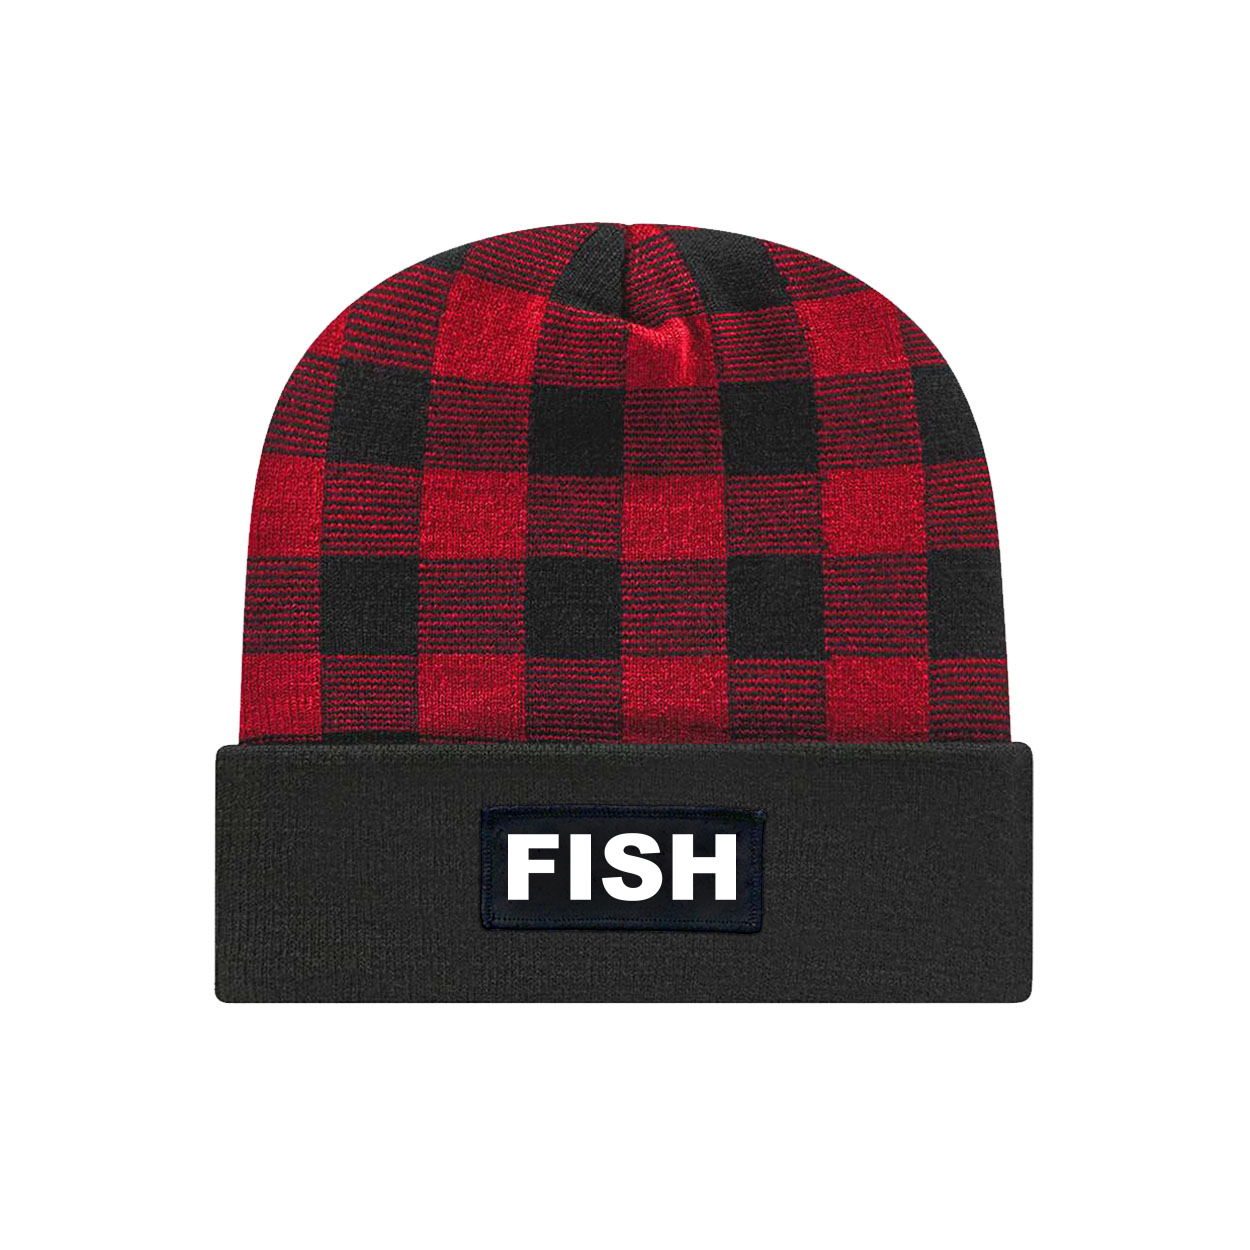 Fish Brand Logo Night Out Woven Patch Roll Up Plaid Beanie Black/True Red